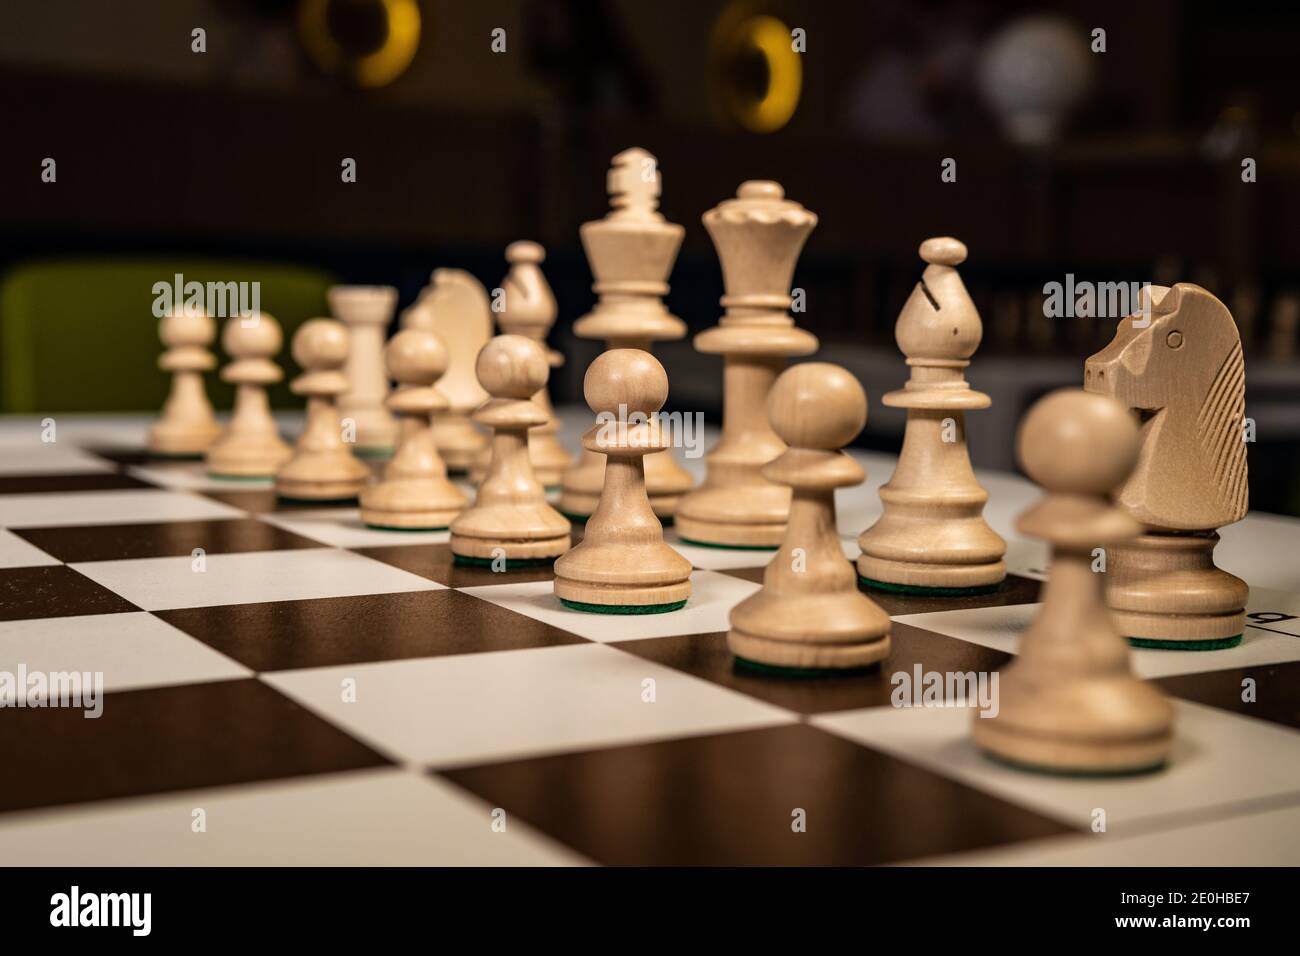 Play wooden chess on a platform in a checkered ivory, pawns and rooks, queens and kings, horses table in the dark, stylish for advertising design. Stock Photo